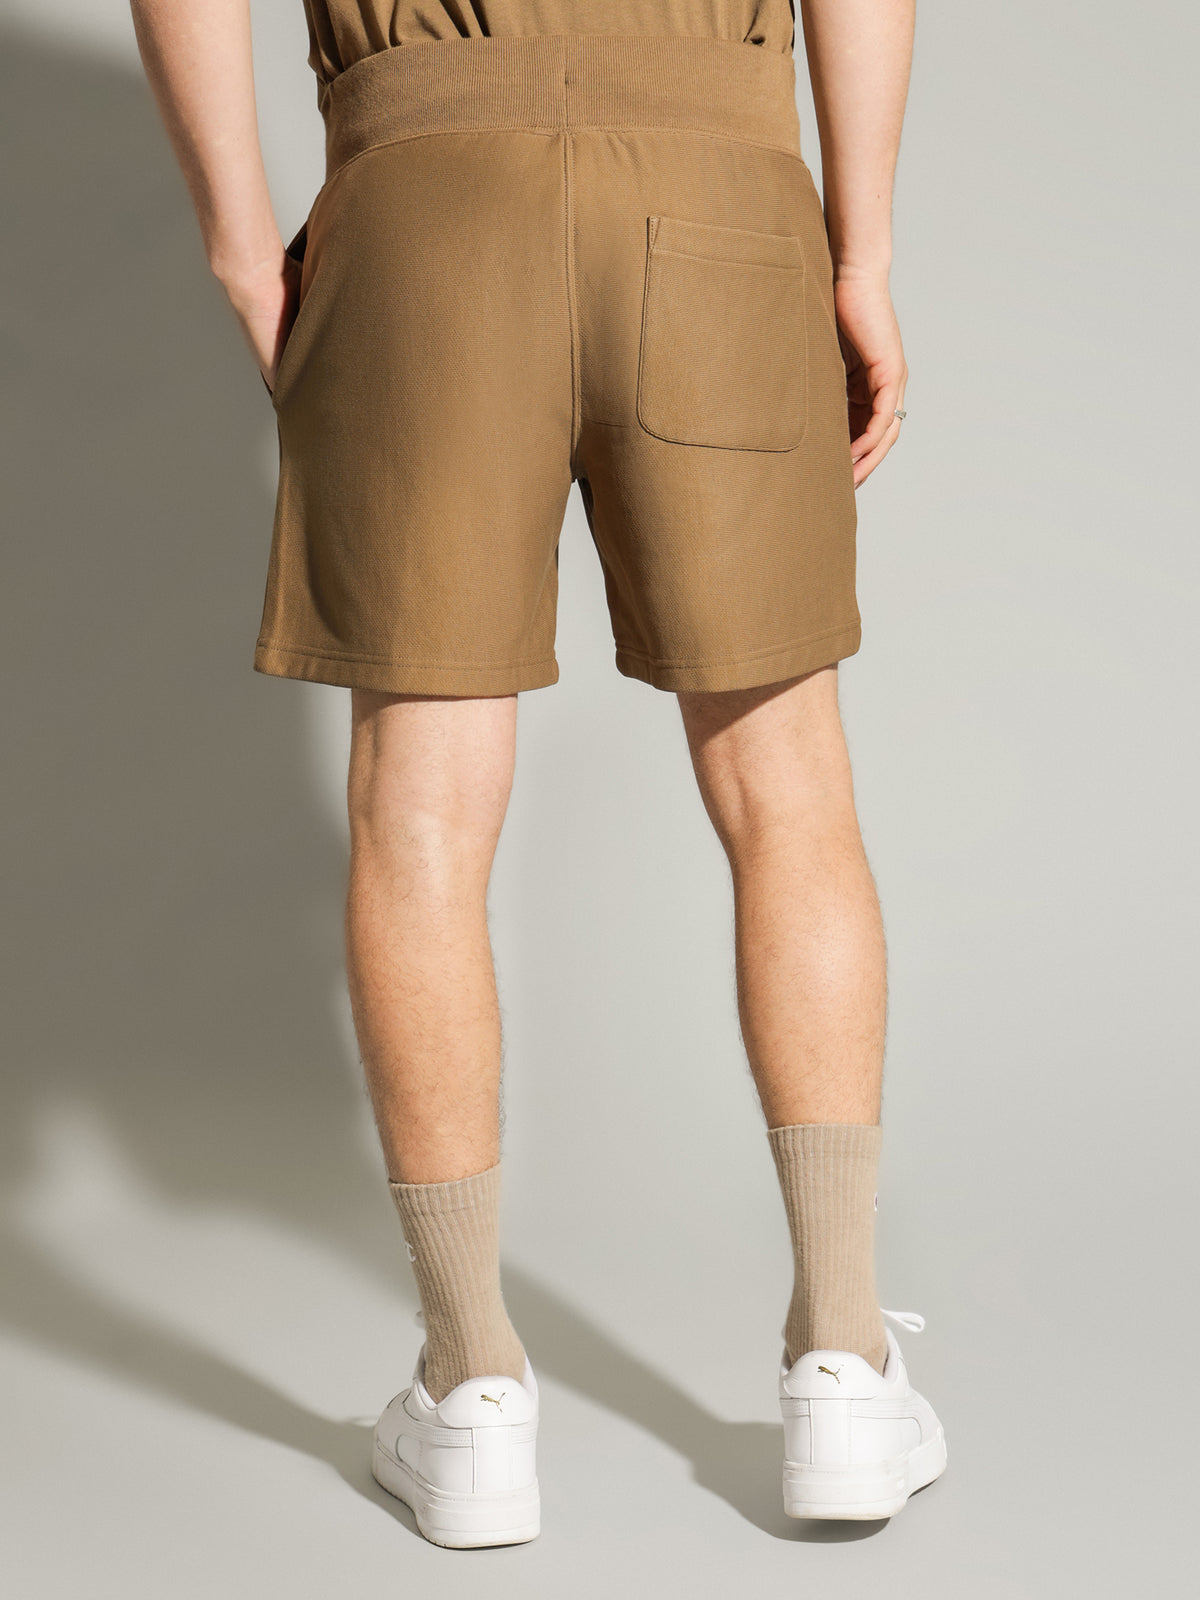 Reverse Weave Terry Shorts in Moway Brown